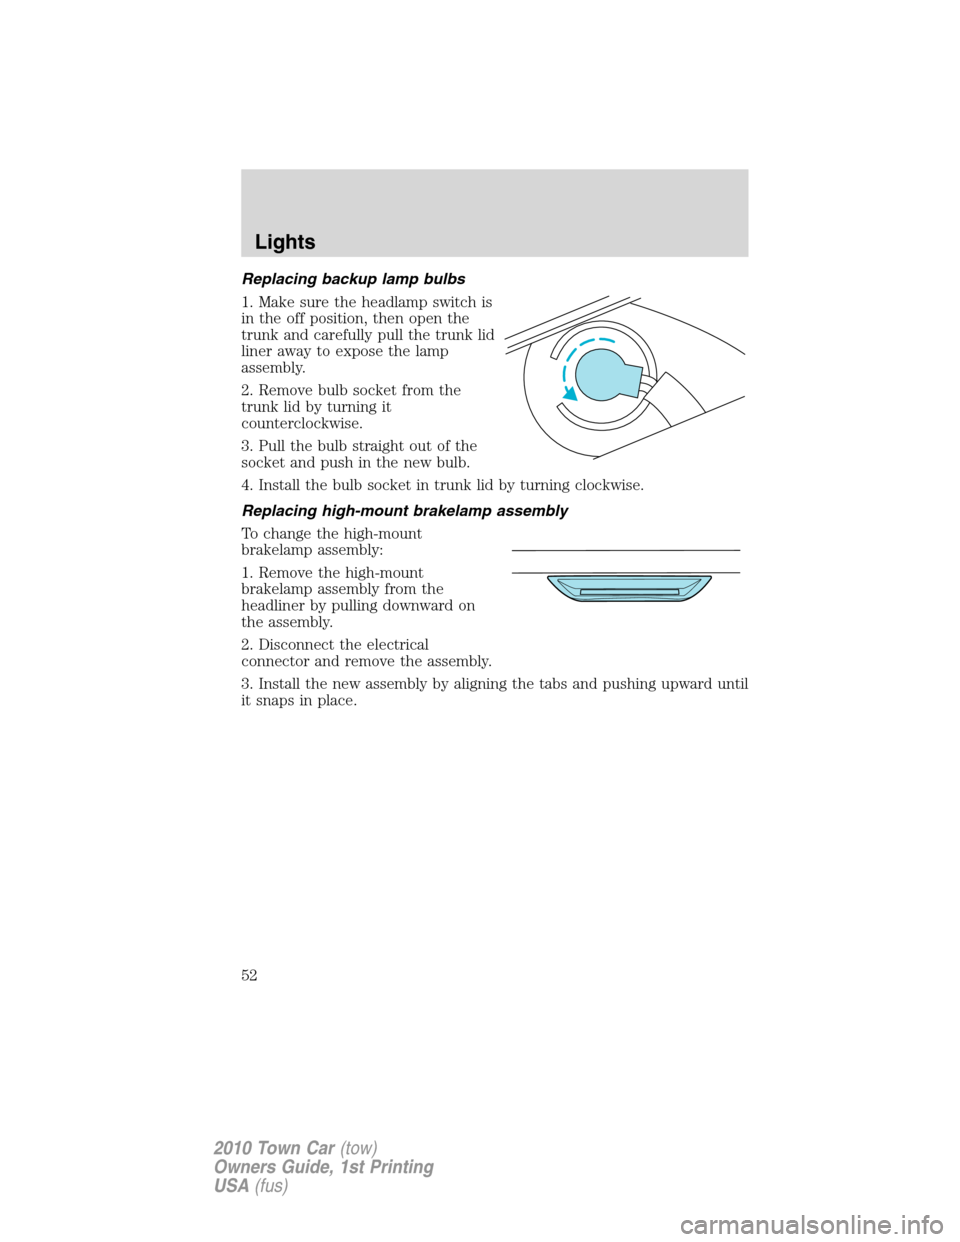 LINCOLN TOWN CAR 2010 User Guide Replacing backup lamp bulbs
1. Make sure the headlamp switch is
in the off position, then open the
trunk and carefully pull the trunk lid
liner away to expose the lamp
assembly.
2. Remove bulb socket 